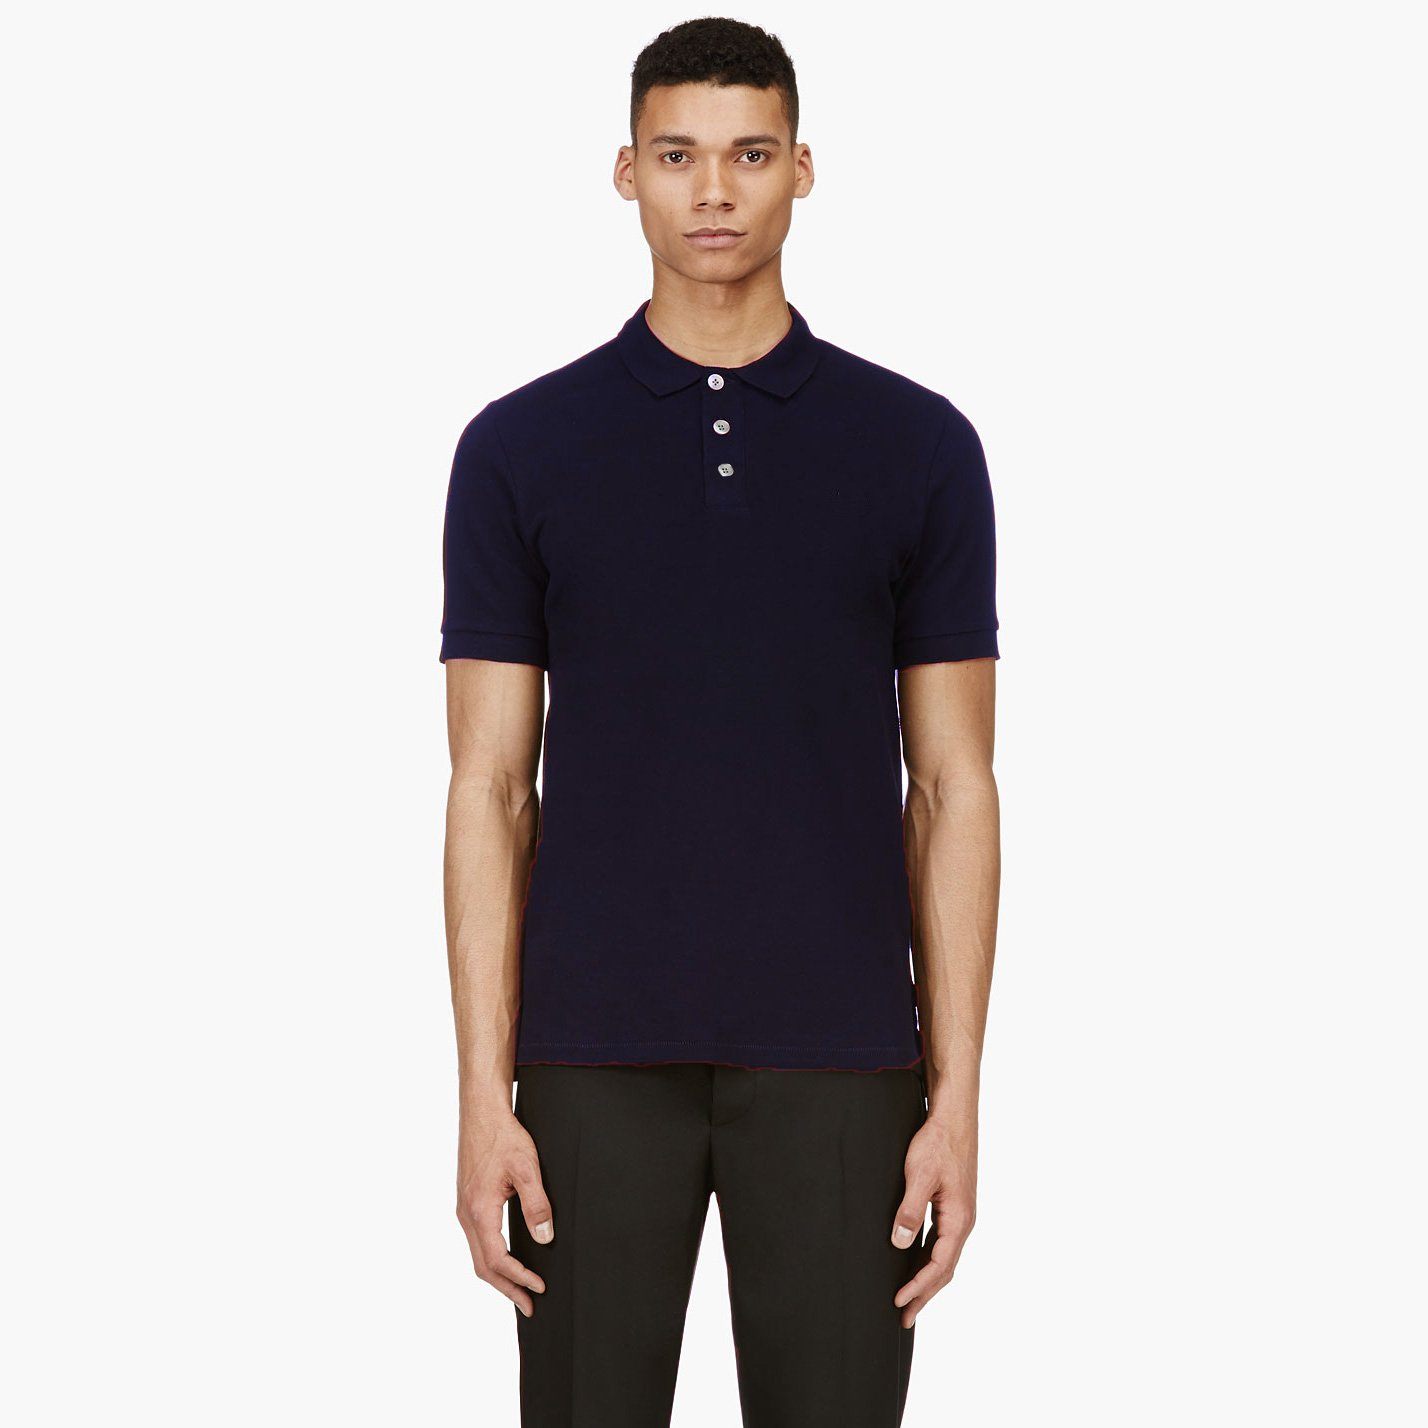 PTW Trend Short Sleeve Minor Fault Polo Shirt Minor Fault Image Navy S 